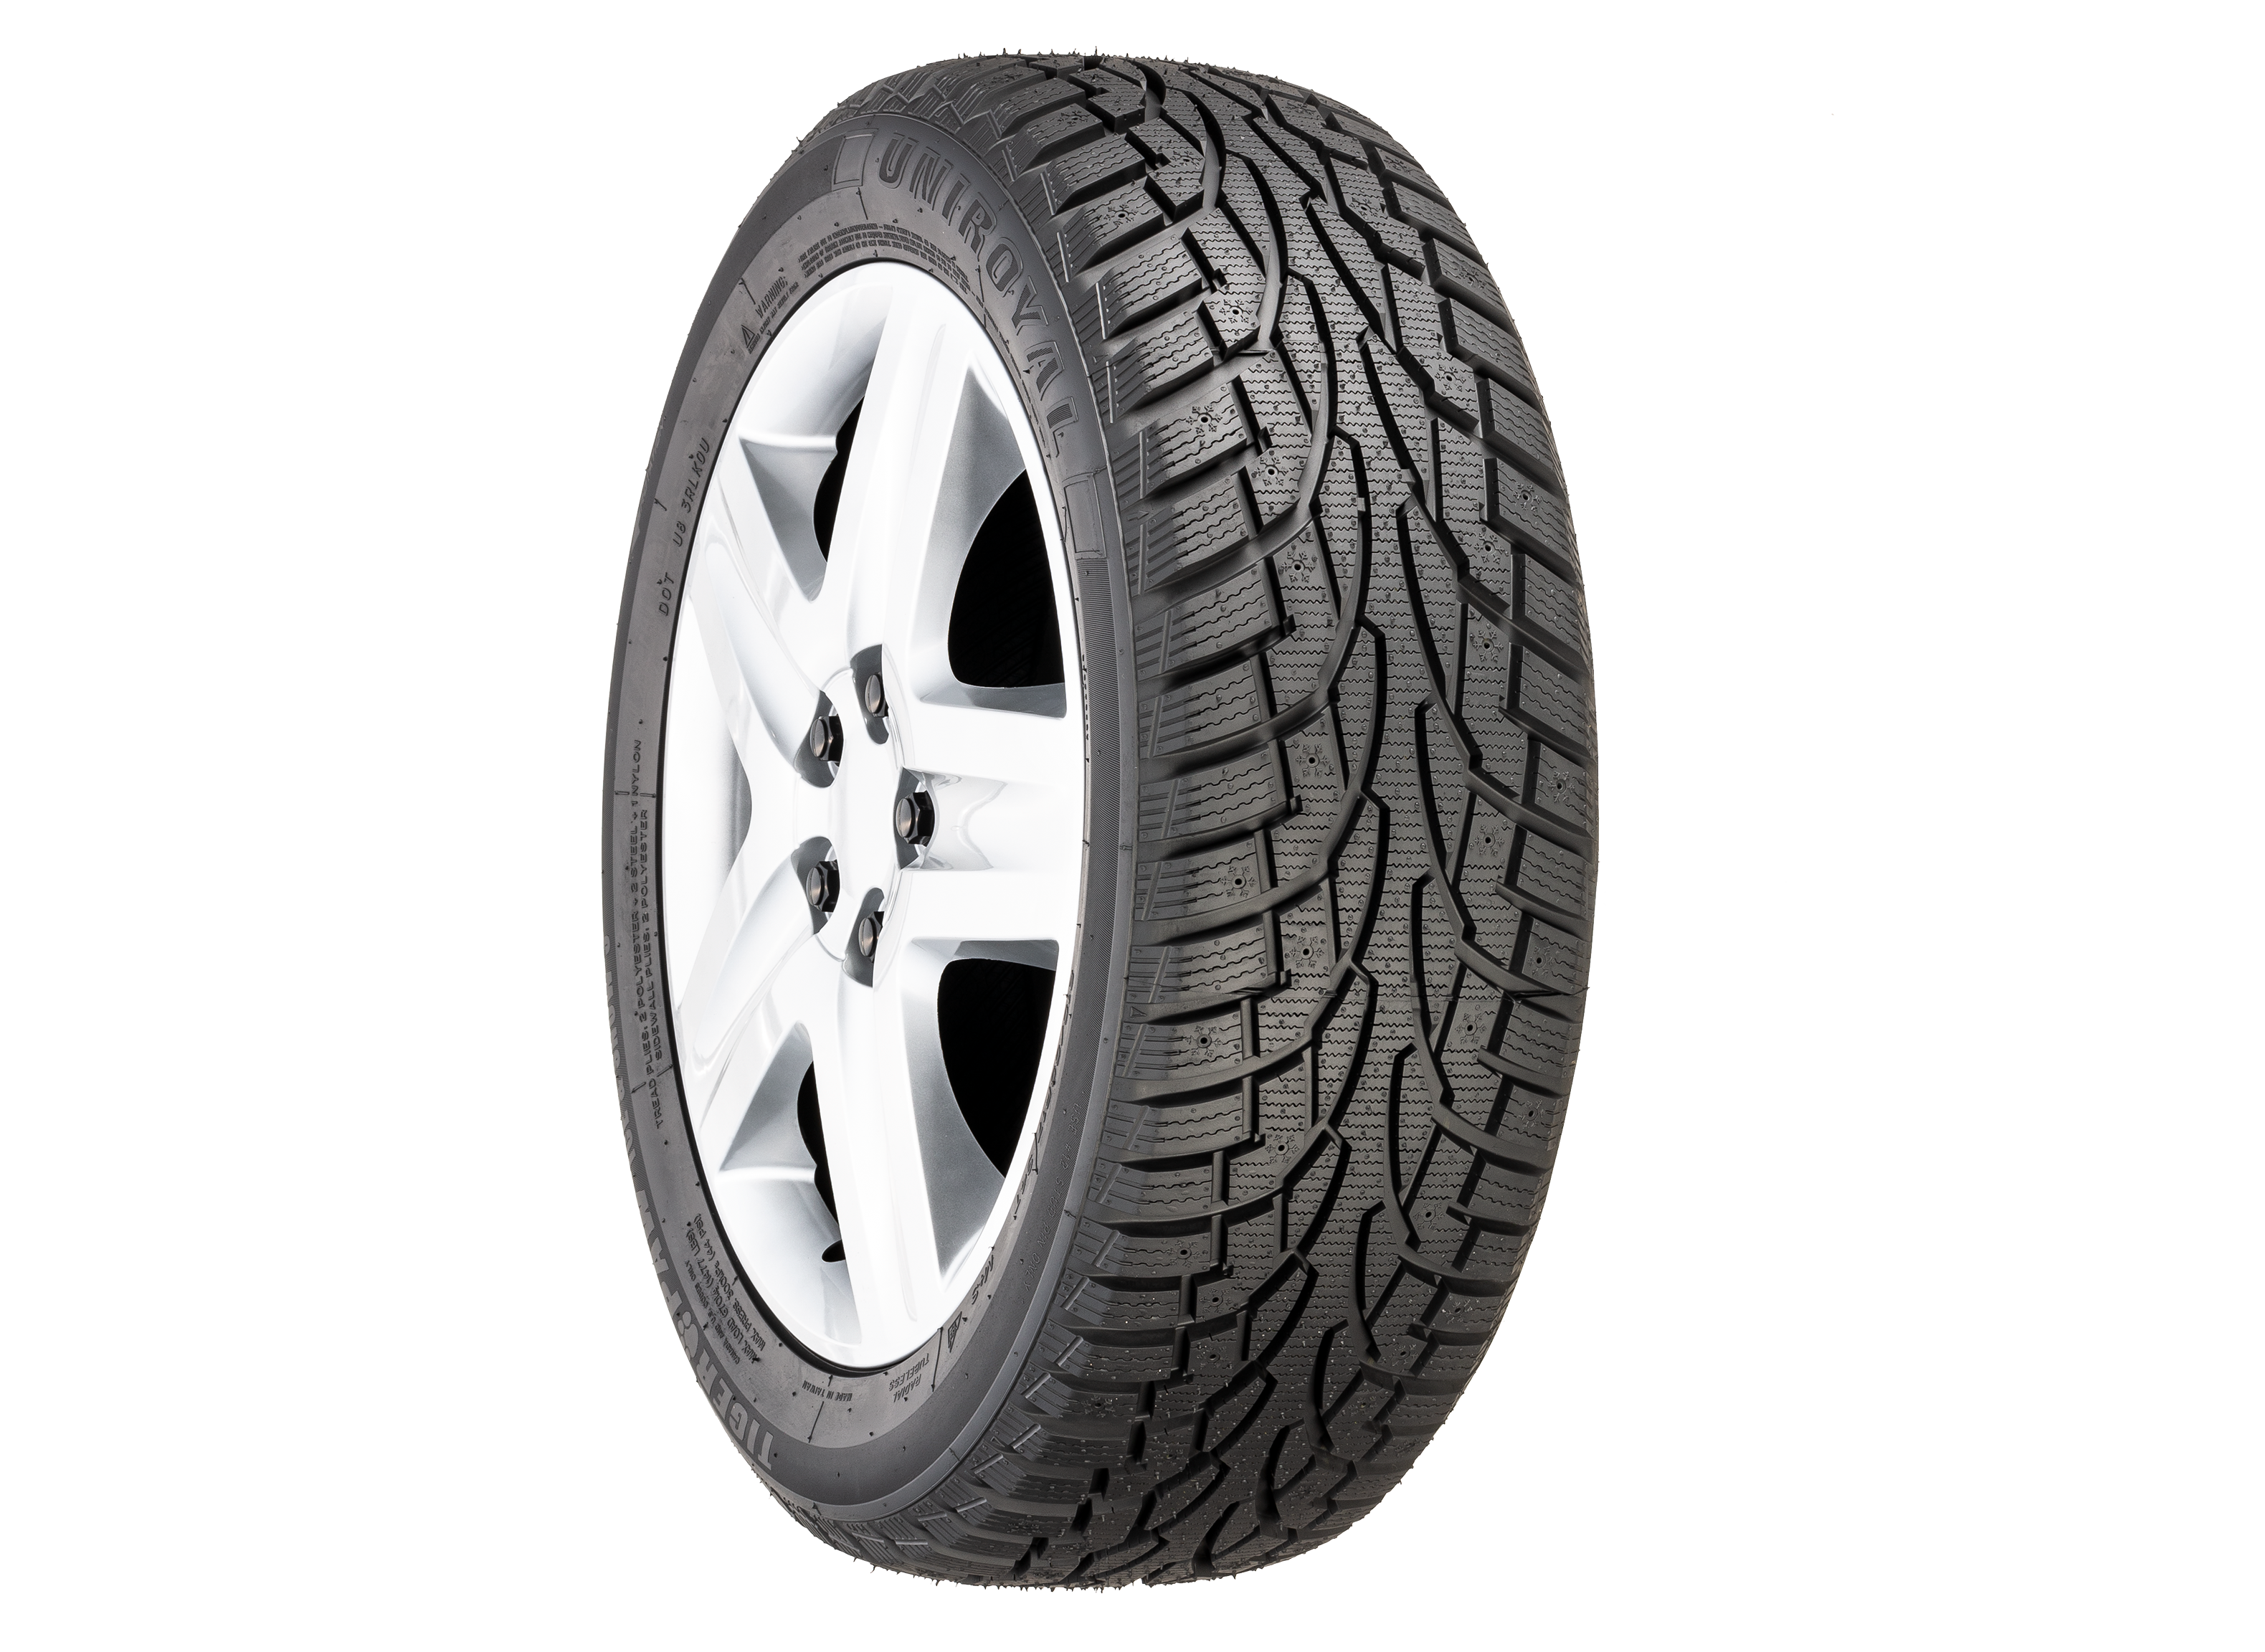 Uniroyal Tiger Paw Ice & Snow 3 Tire Review - Consumer Reports